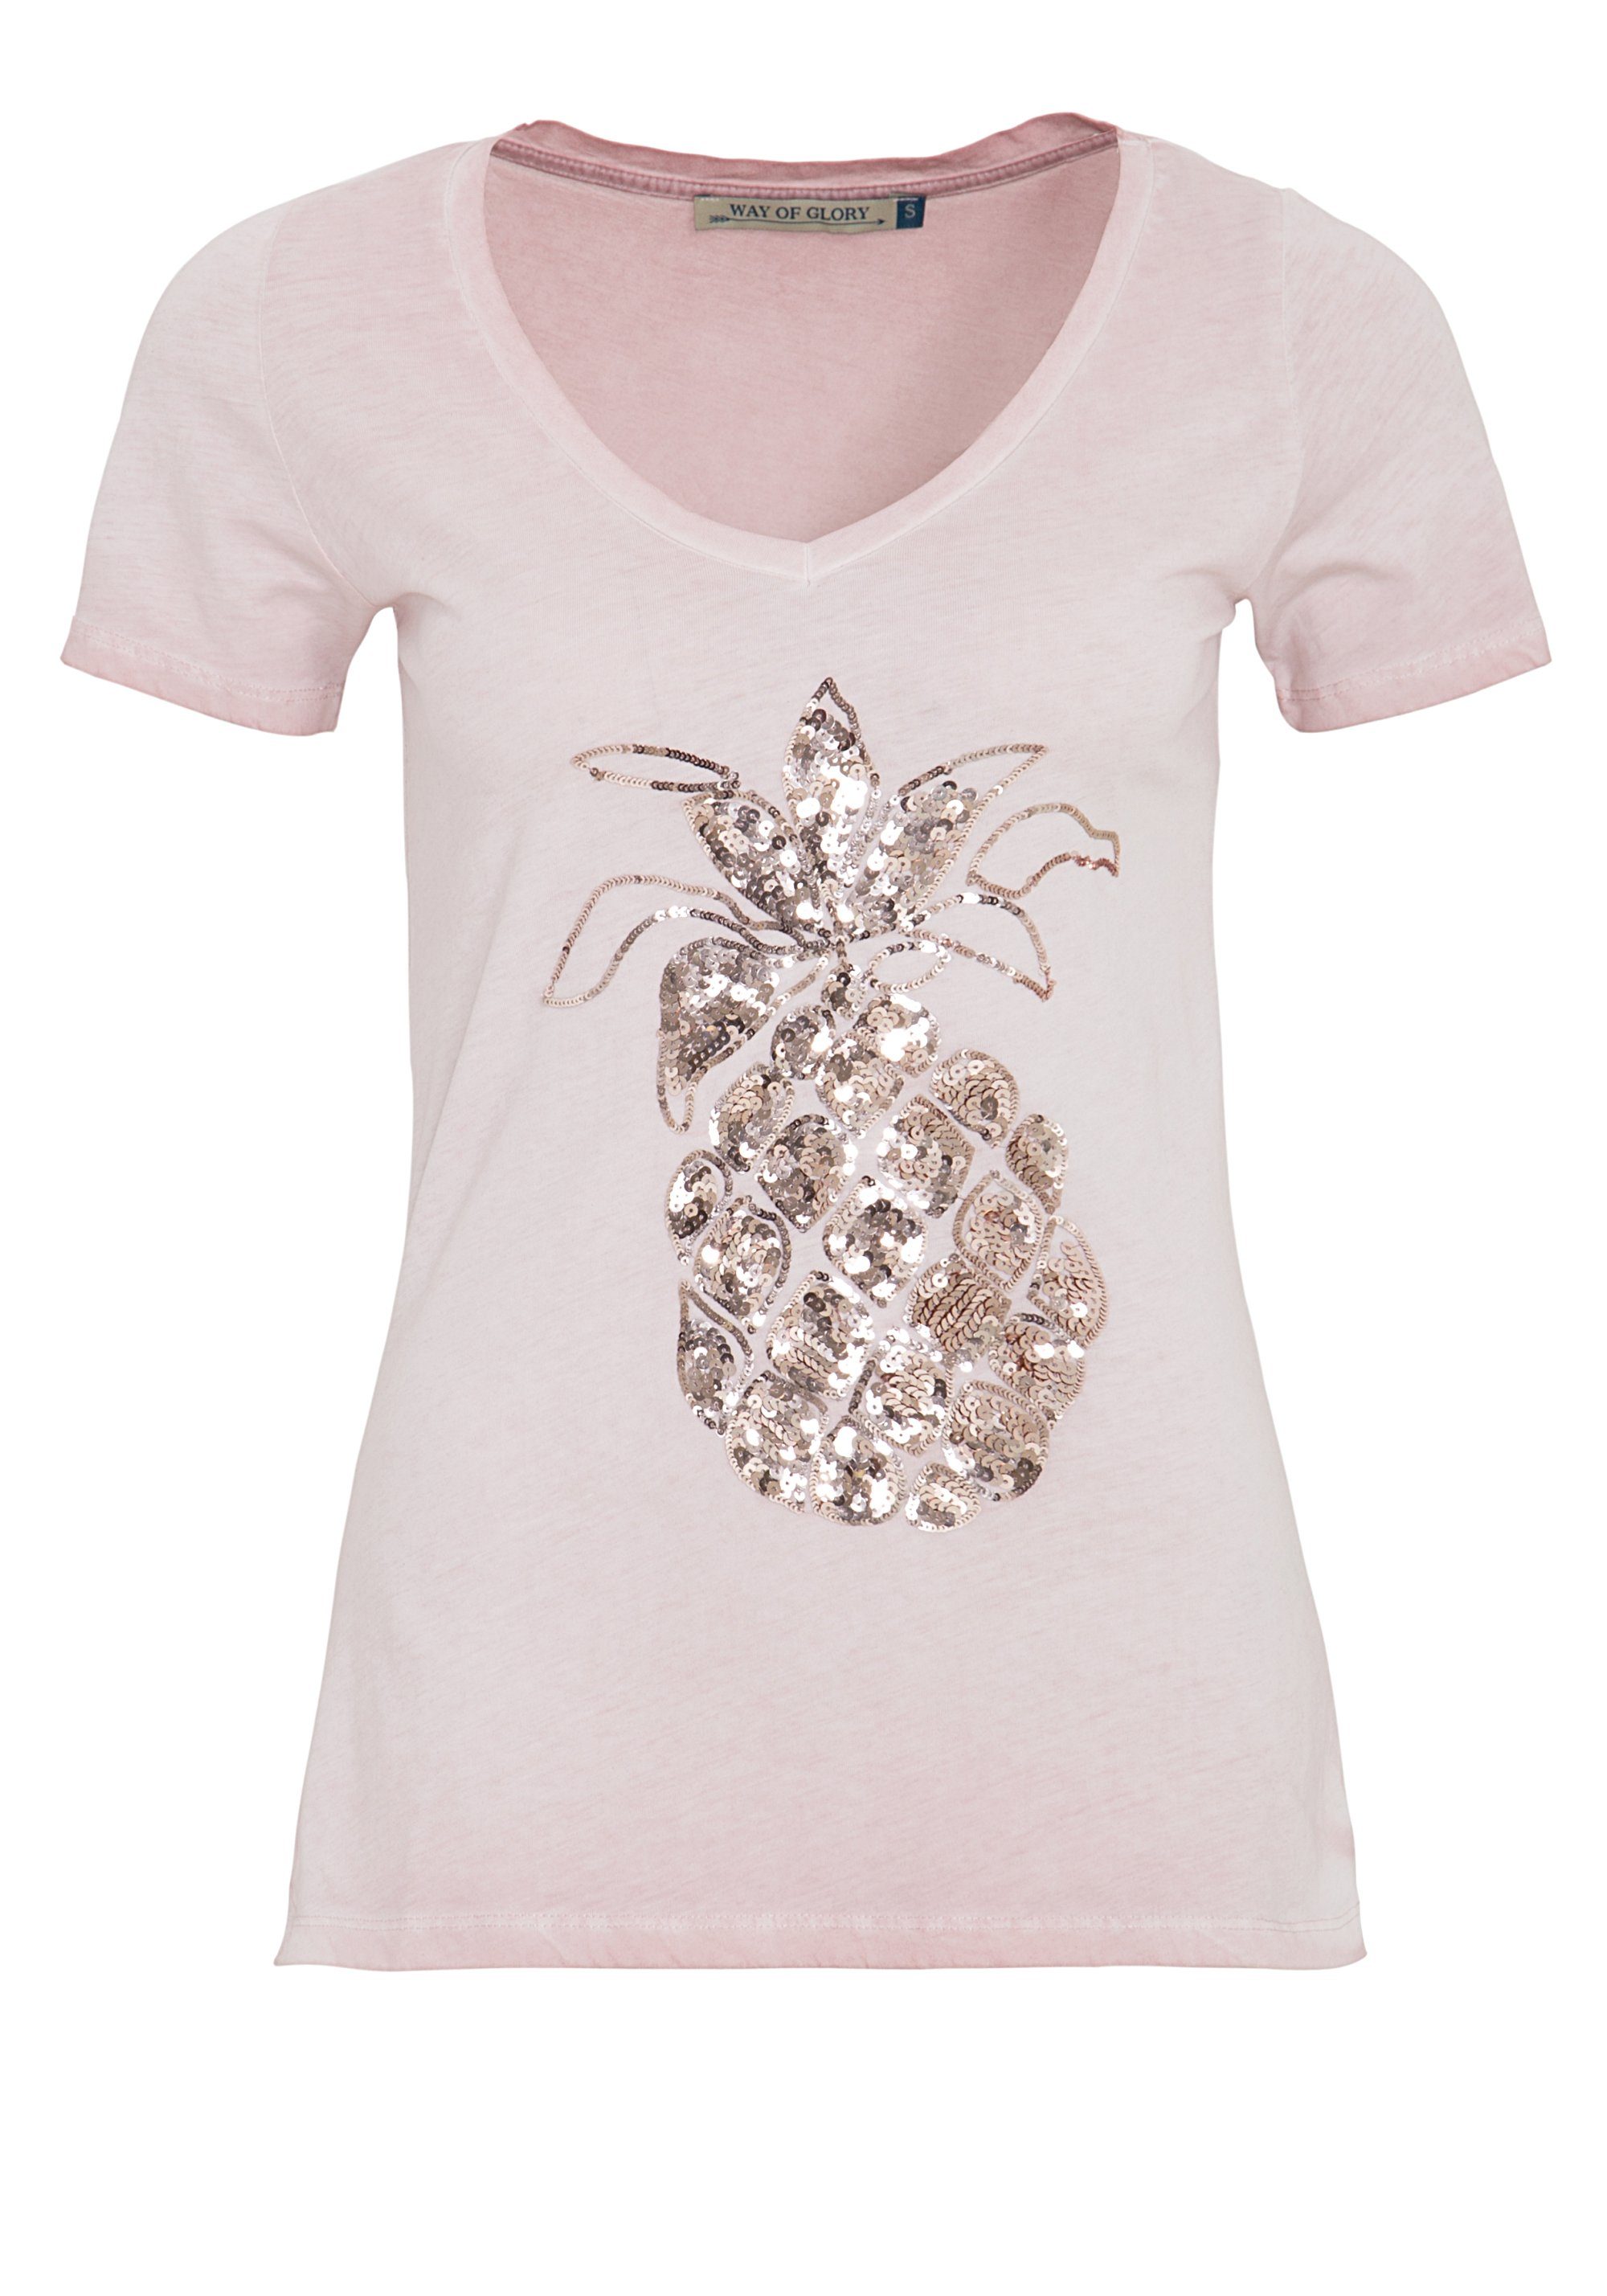 T-Shirt Glory Waschung in Way rosa of Used Motiv mit Pailletten